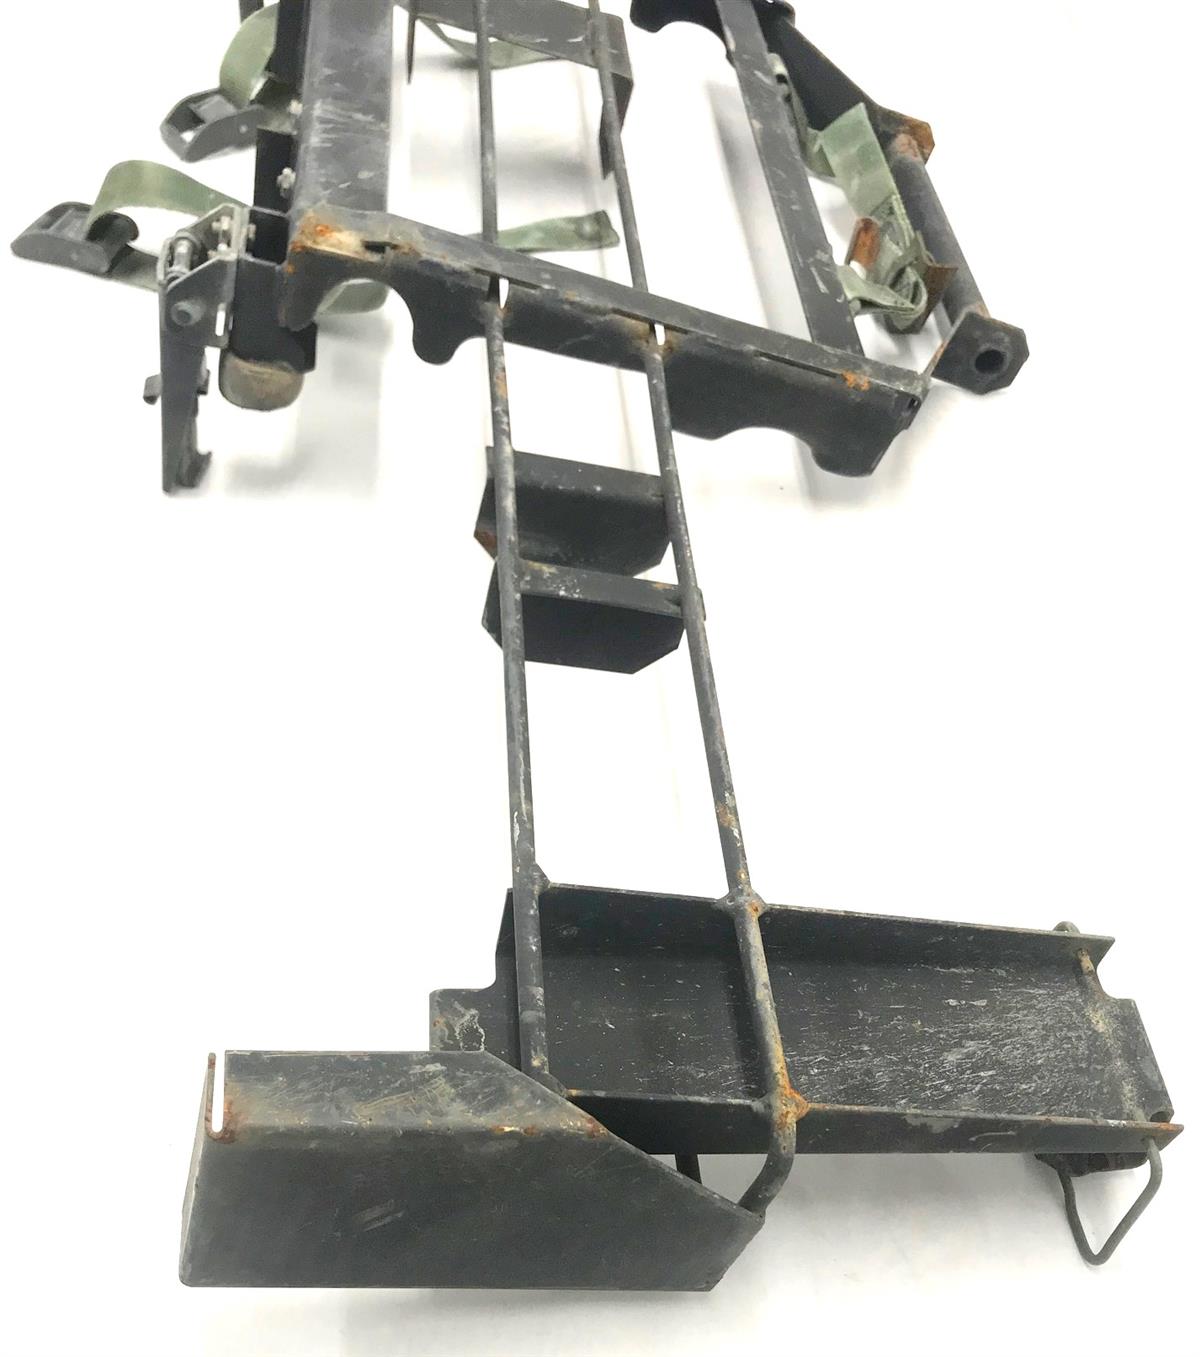 HM-920 | HM-920  Pioneer Stowage Tool Tray  Rack with straight mounting clamps (3)USED.jpg